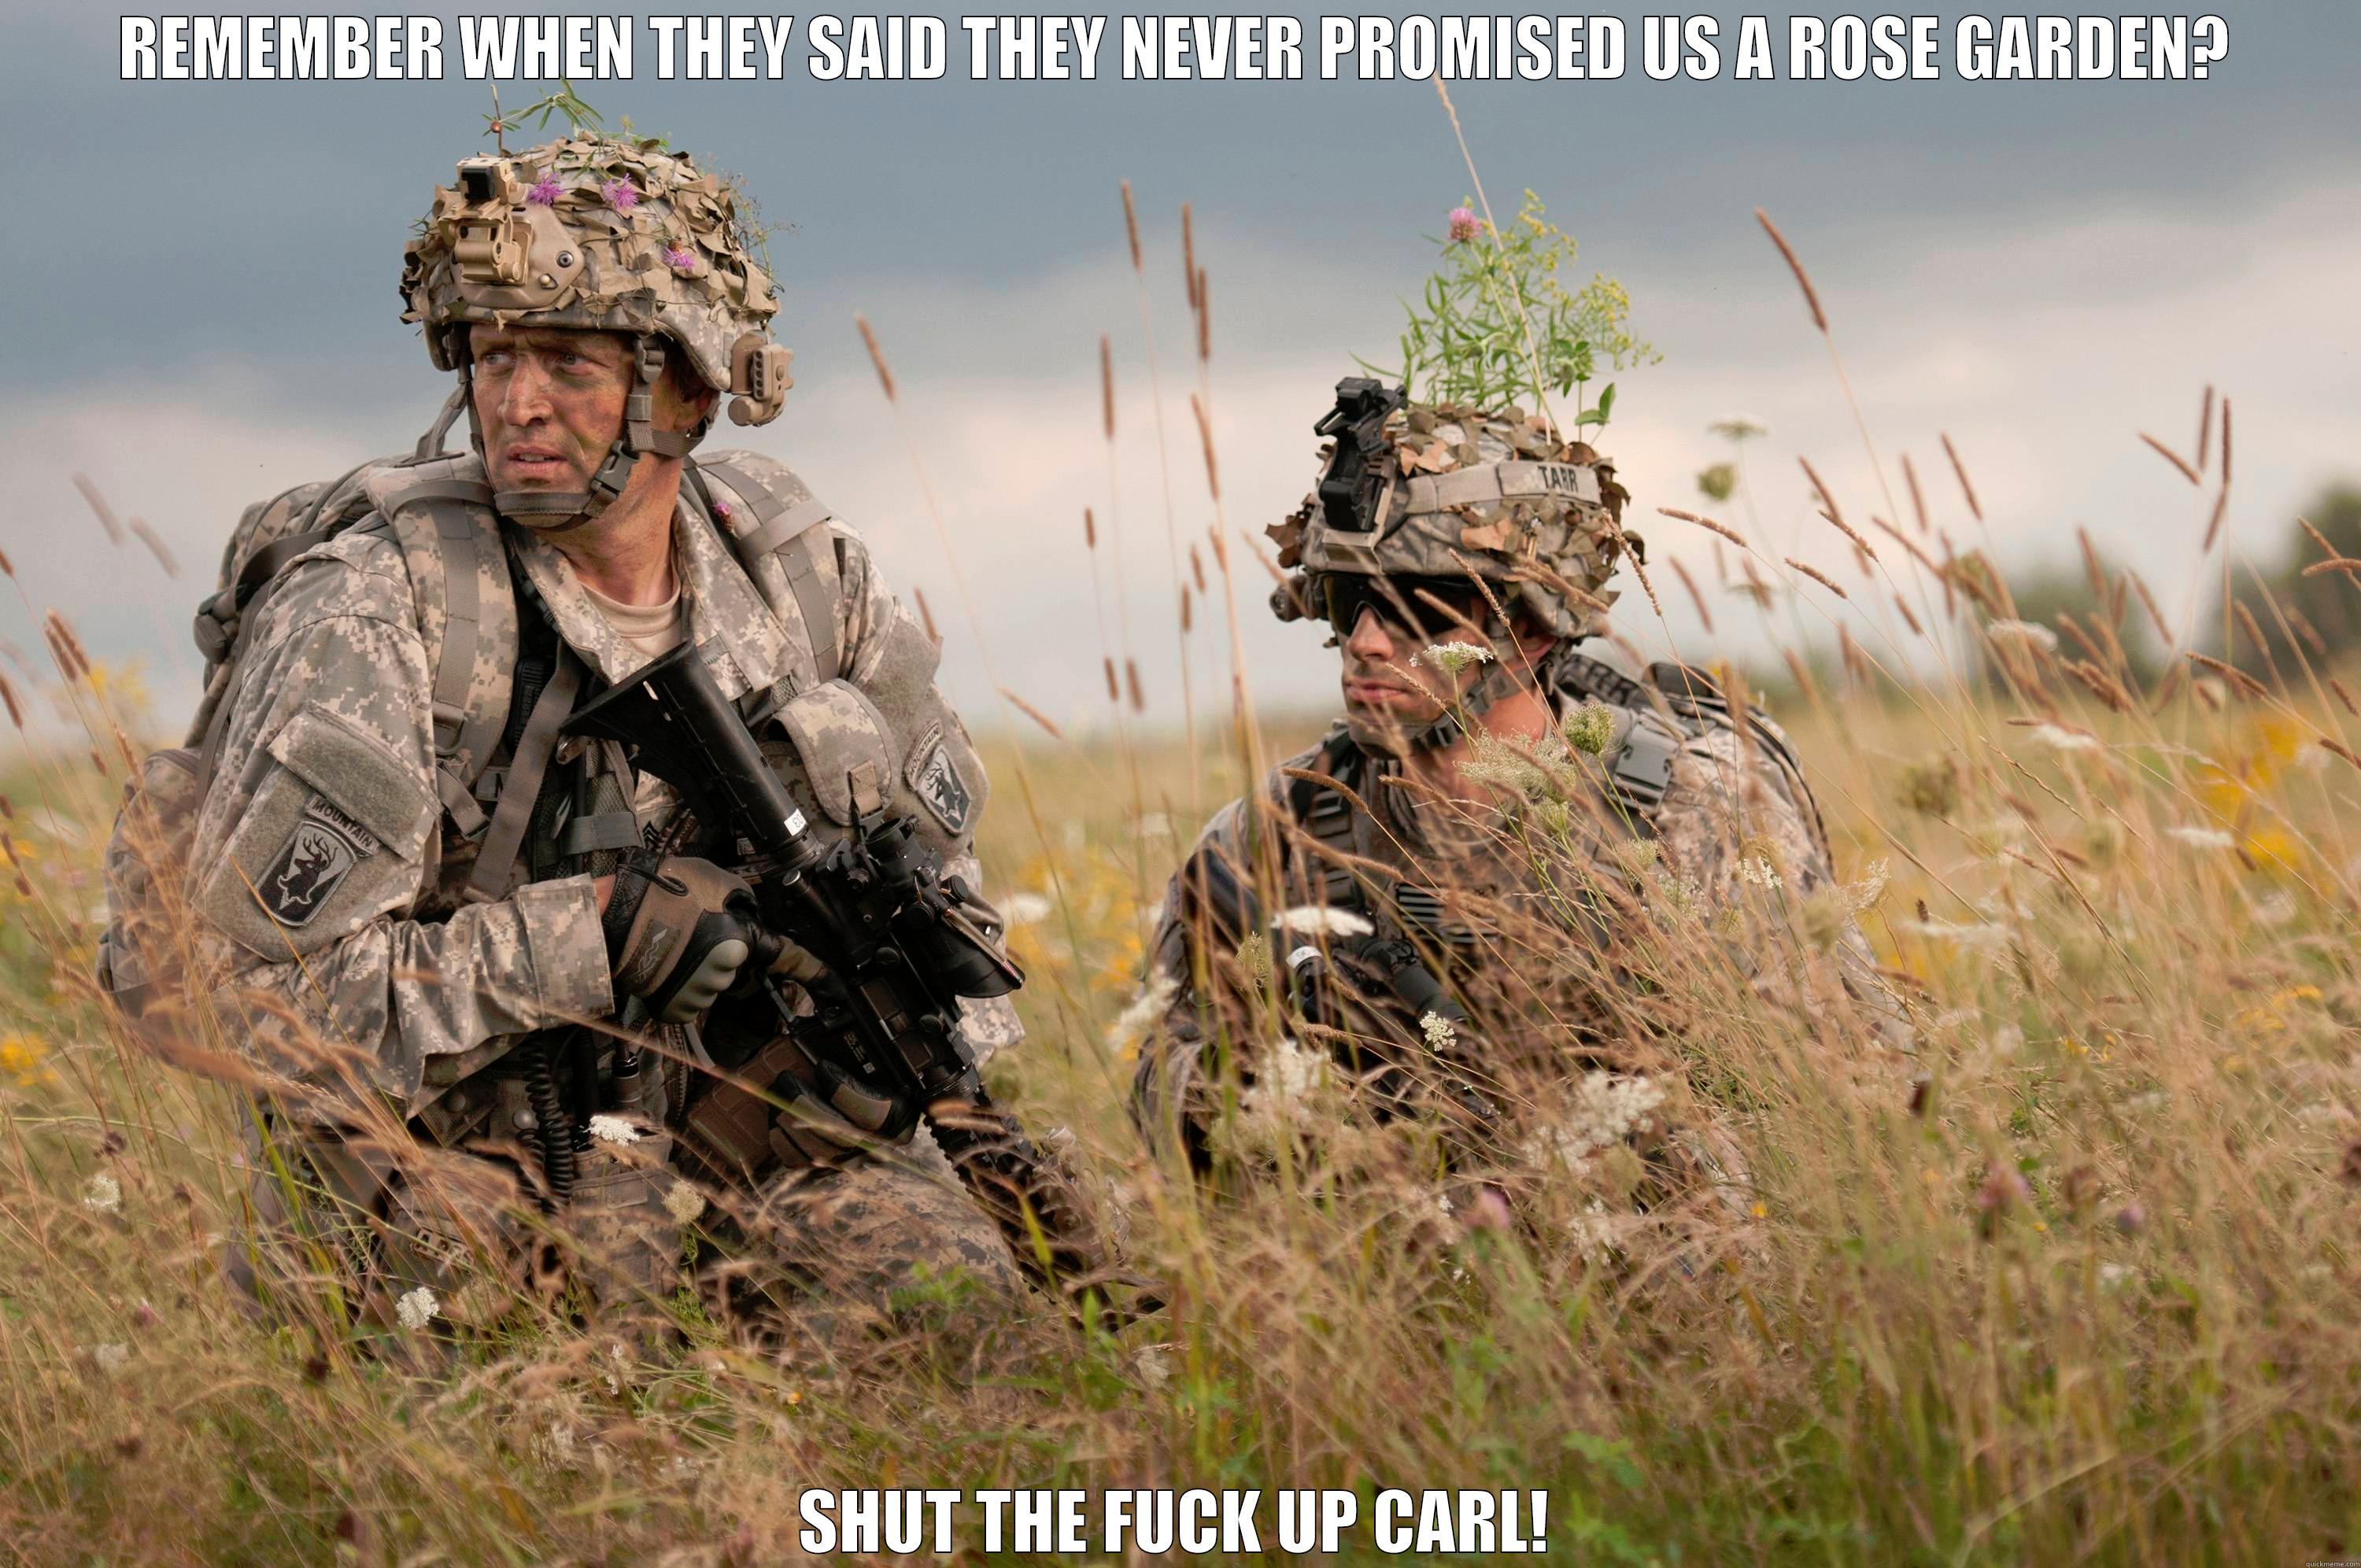 Rose Garden - REMEMBER WHEN THEY SAID THEY NEVER PROMISED US A ROSE GARDEN? SHUT THE FUCK UP CARL! Misc